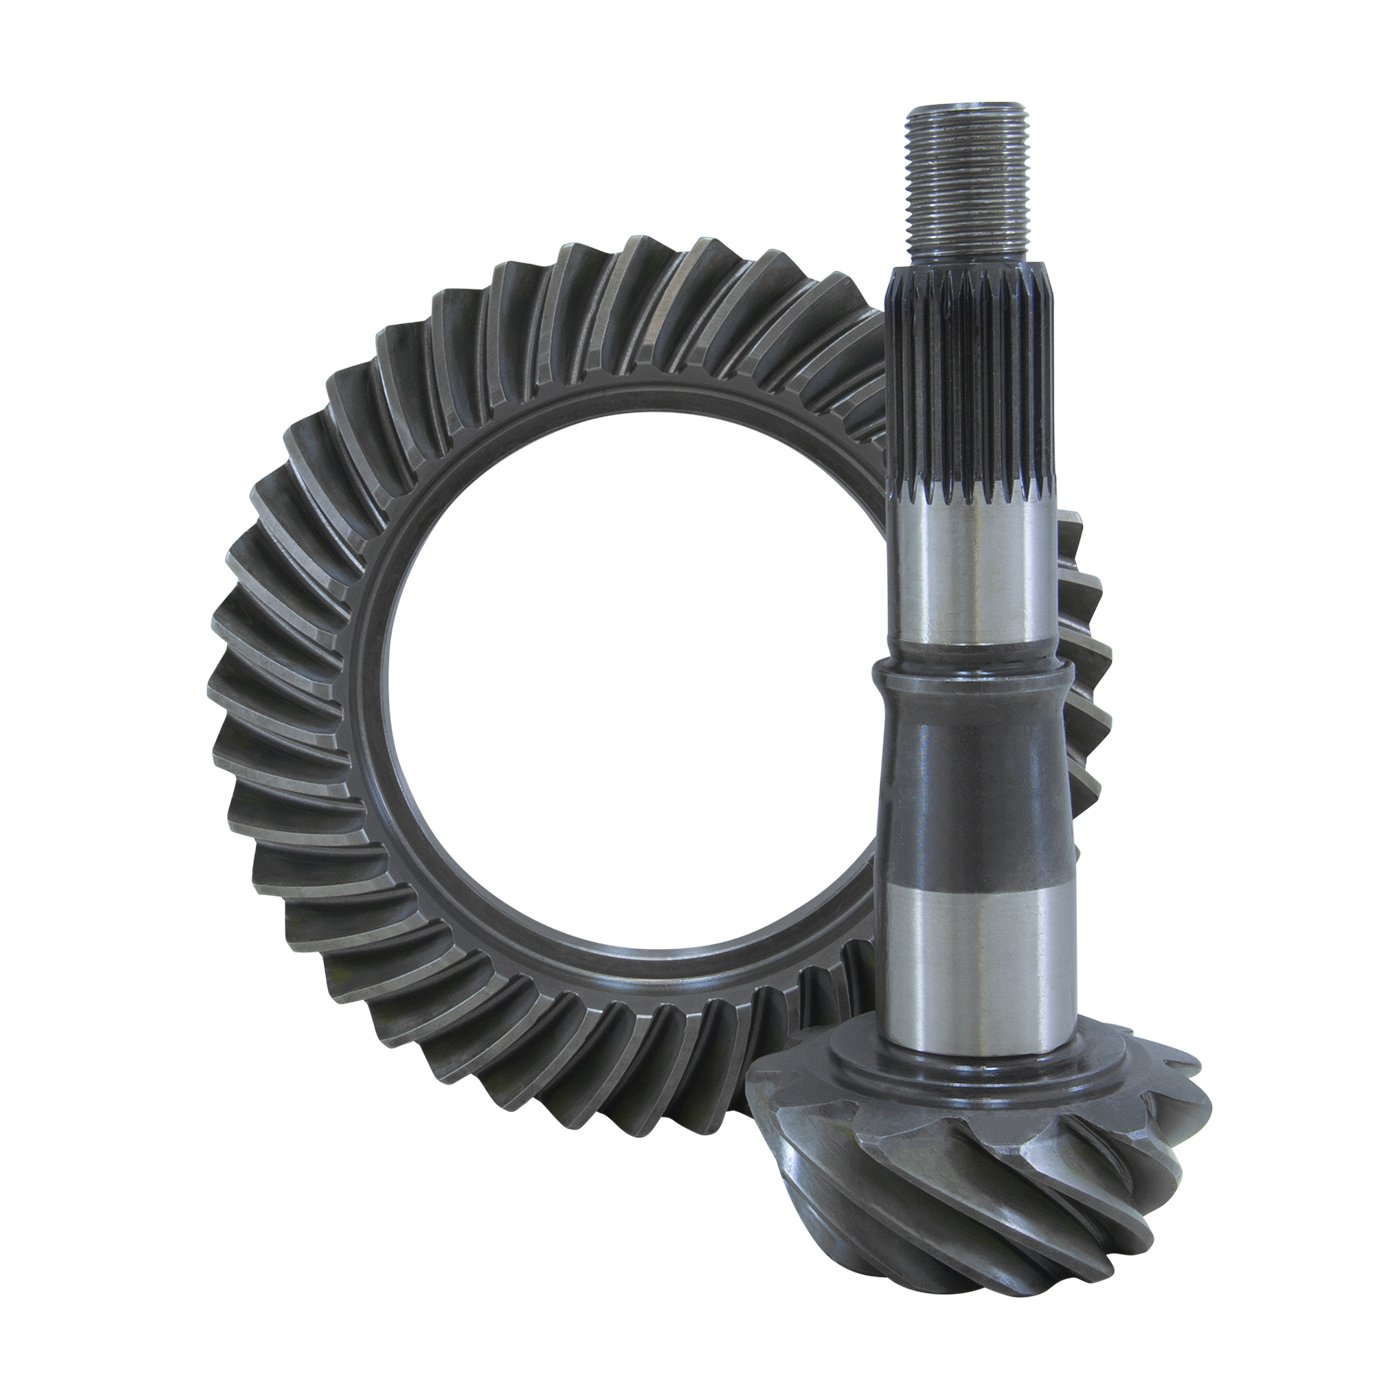 USA Standard ZG GM7.5-308 Ring & Pinion Gear Set, For GM 7.5 in., 3.08 Ratio